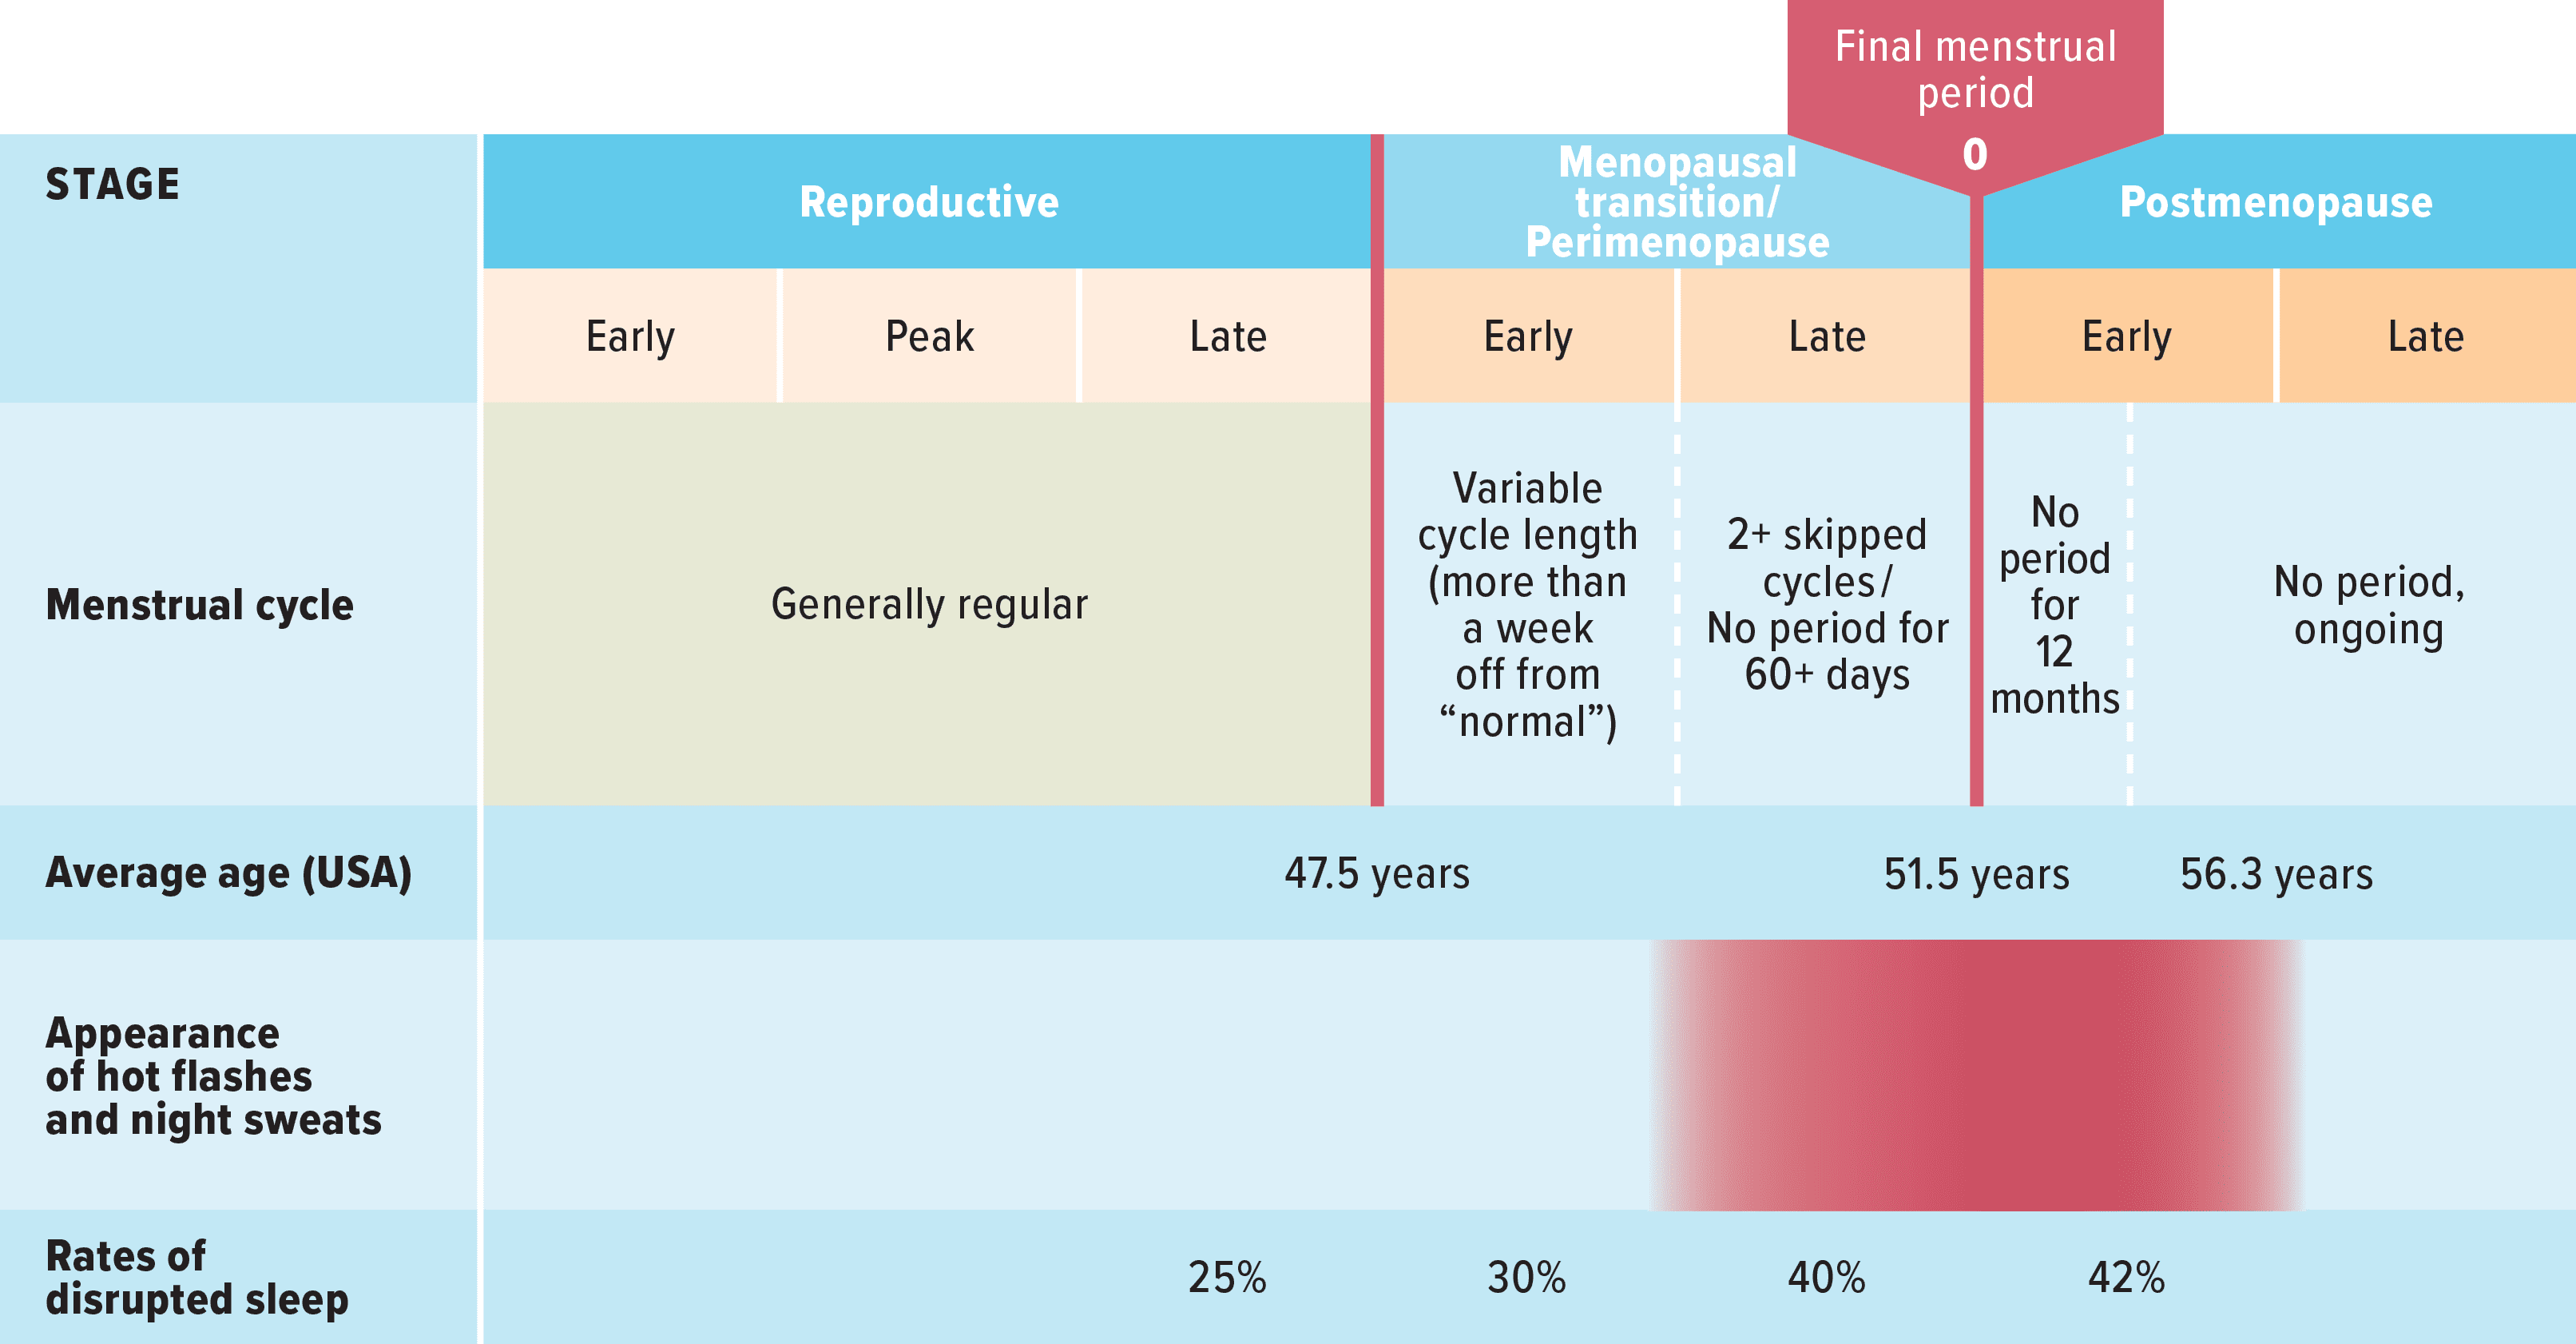 Table shows various hormonal stages and symptoms associated with it. The main stages are: the reproductive stage, the perimenopausal stage, and the postmenopausal stage. Women enter into perimenopause at 47.5 years old, on average, and reach menopause by age 51.5 years old, on average. Appearance of hot flashes peak between late perimenopause and early postmenopause. Rates of sleep disruption begin to increase around early perimenopause, and continue until late postmenopause.